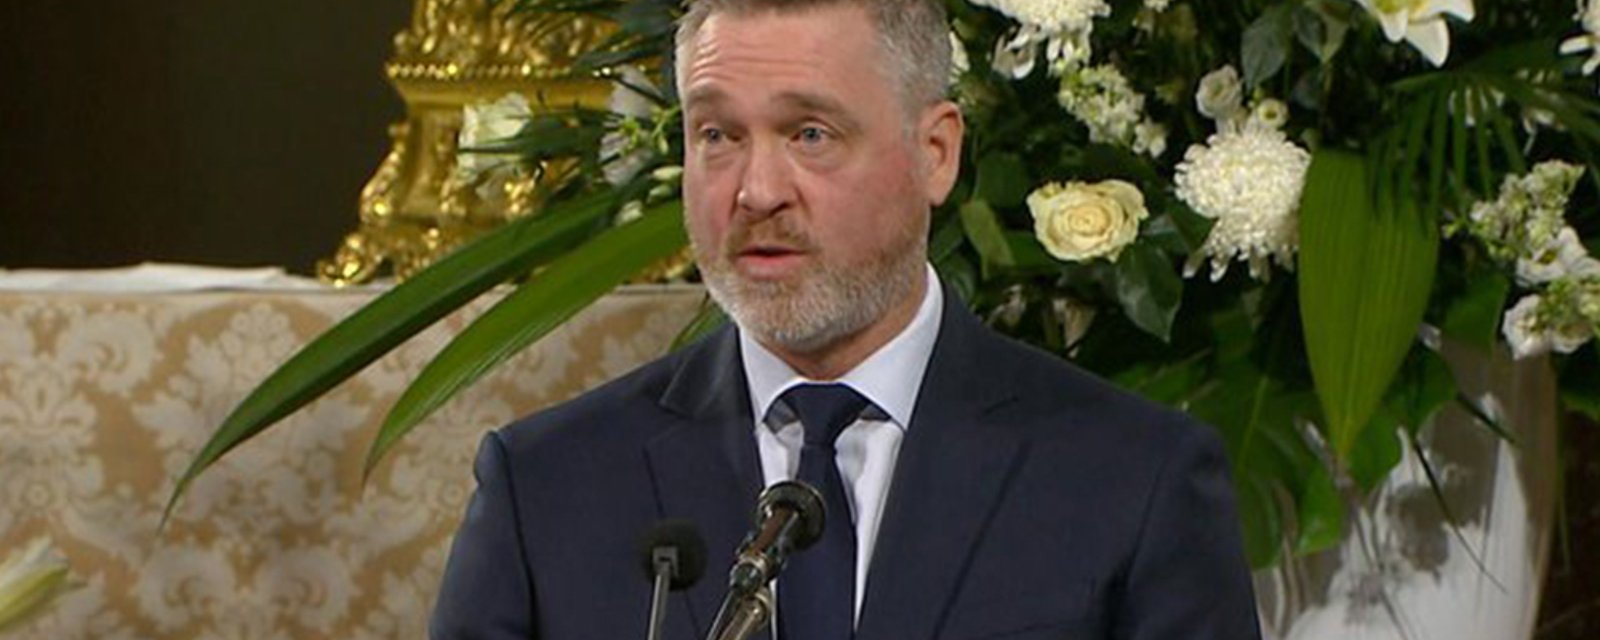 Patrick Roy gives heartfelt eulogy to Guy Lafleur at Lafleur's funeral in Montreal today